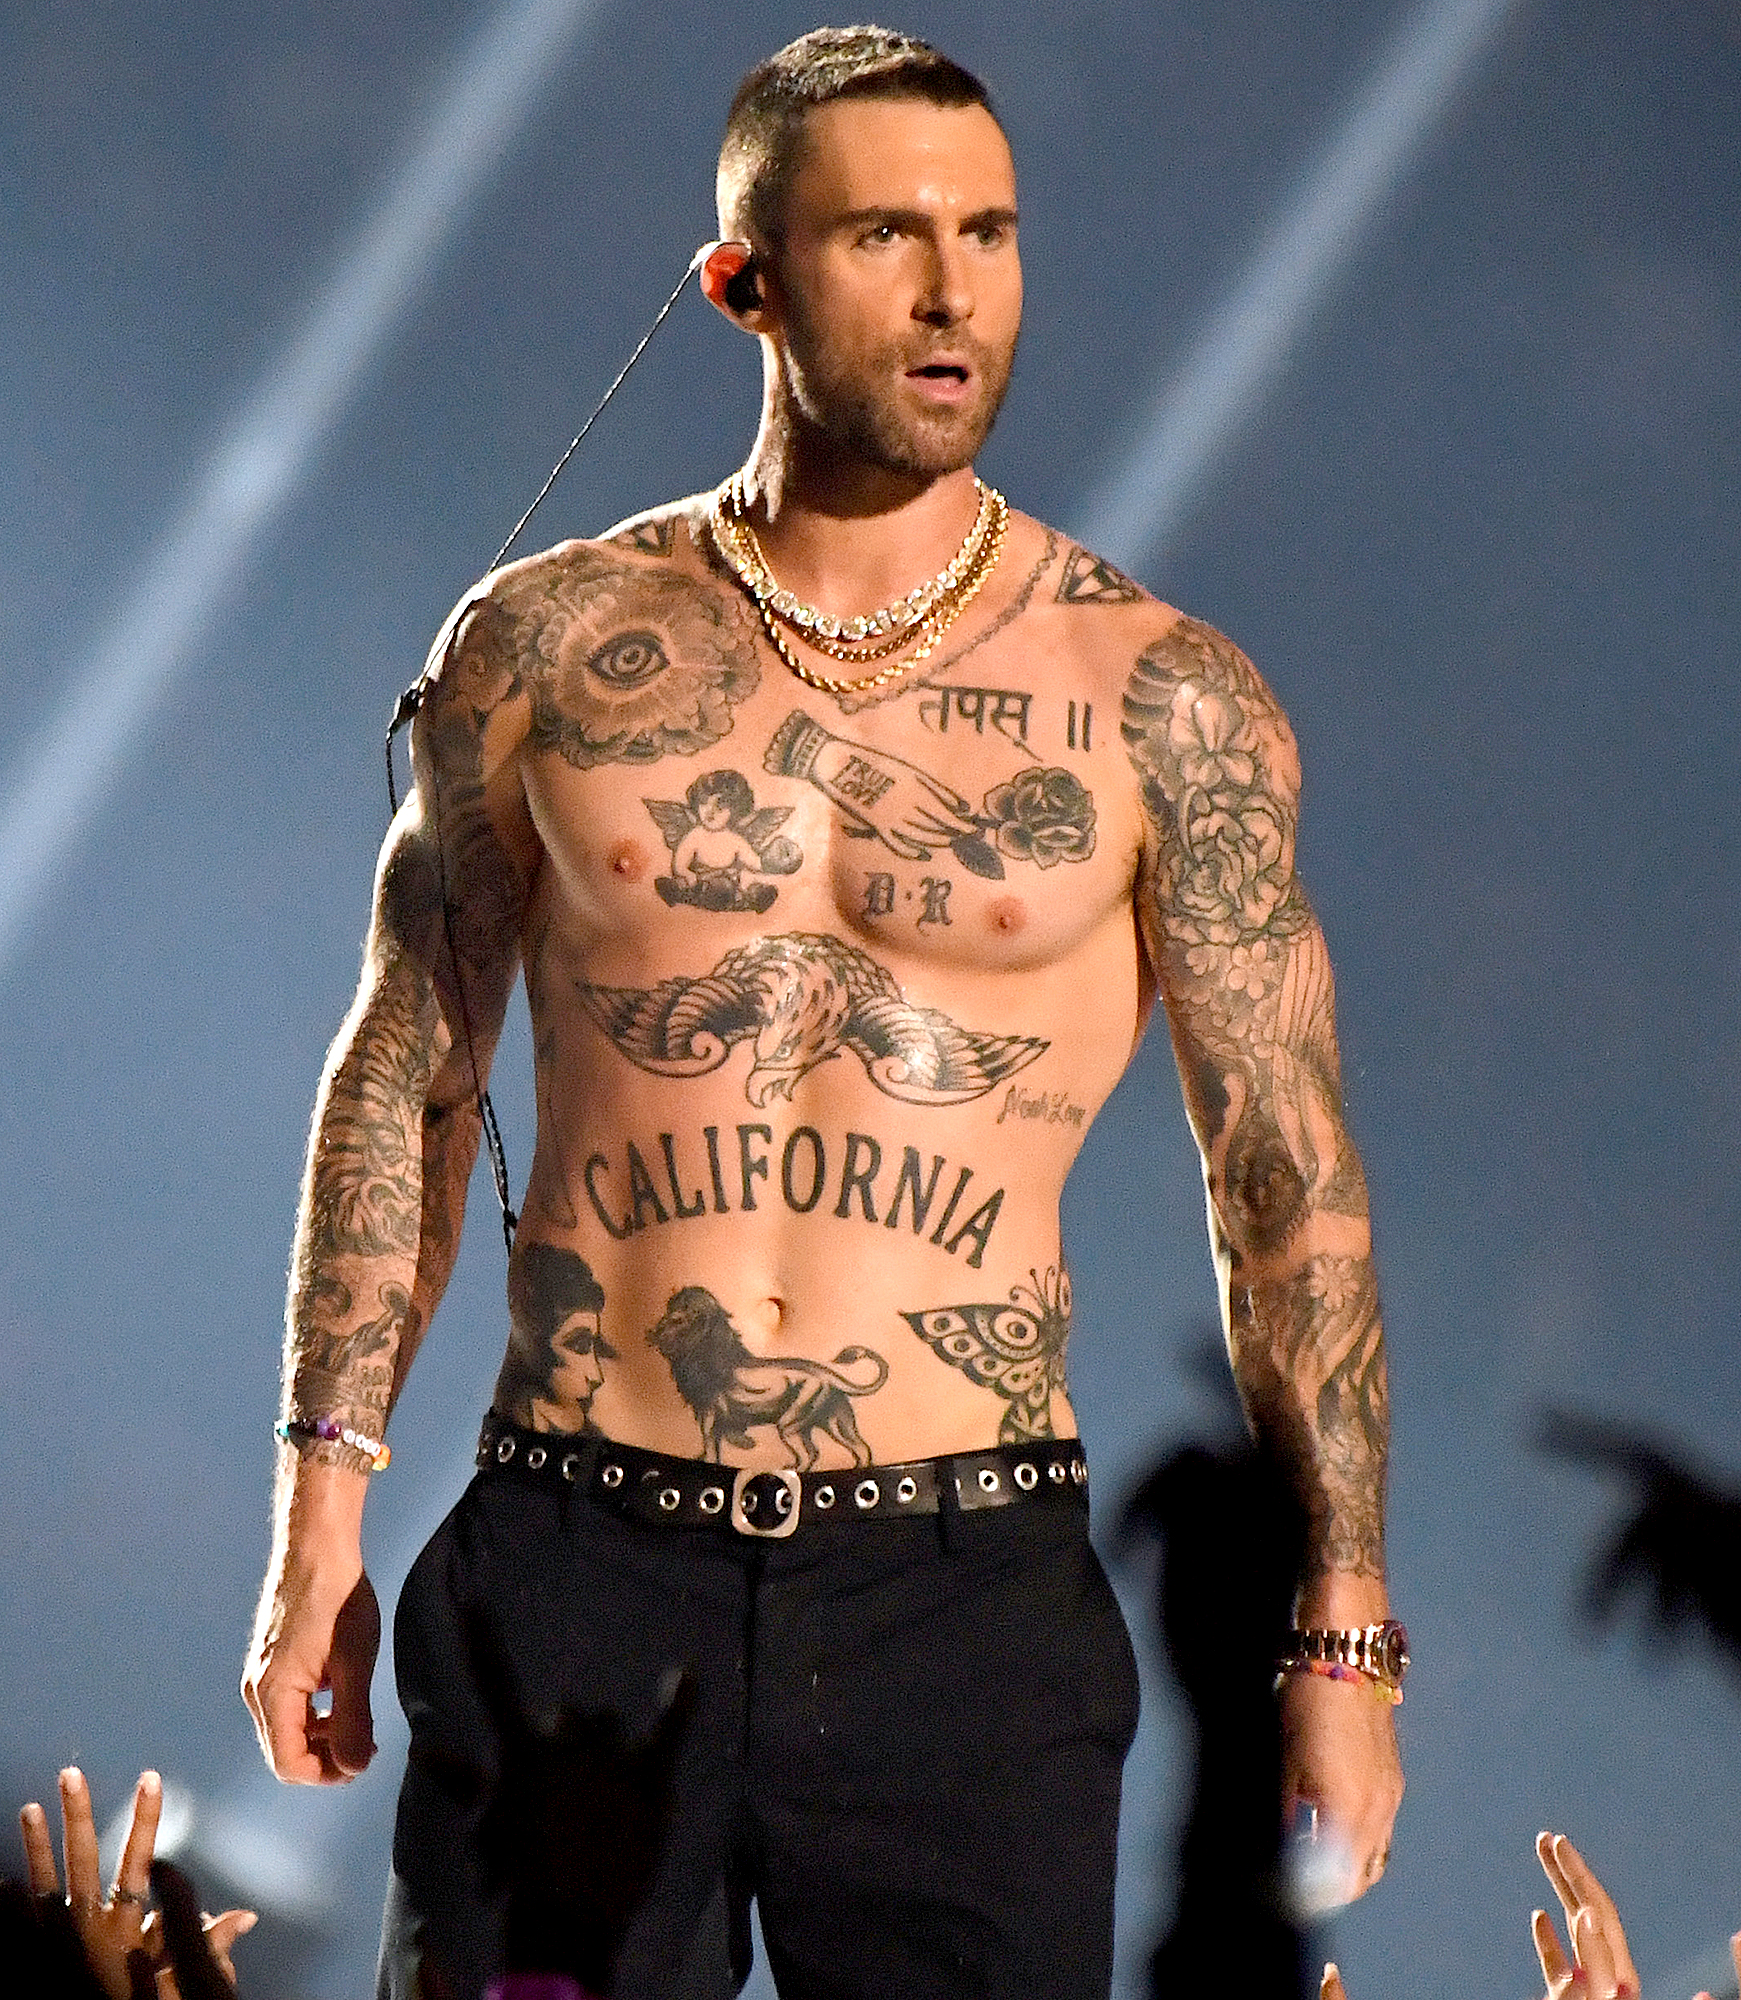 Does Adam Levine's Tattoo Spell 'Bro' With His Nipple as the 'O'?